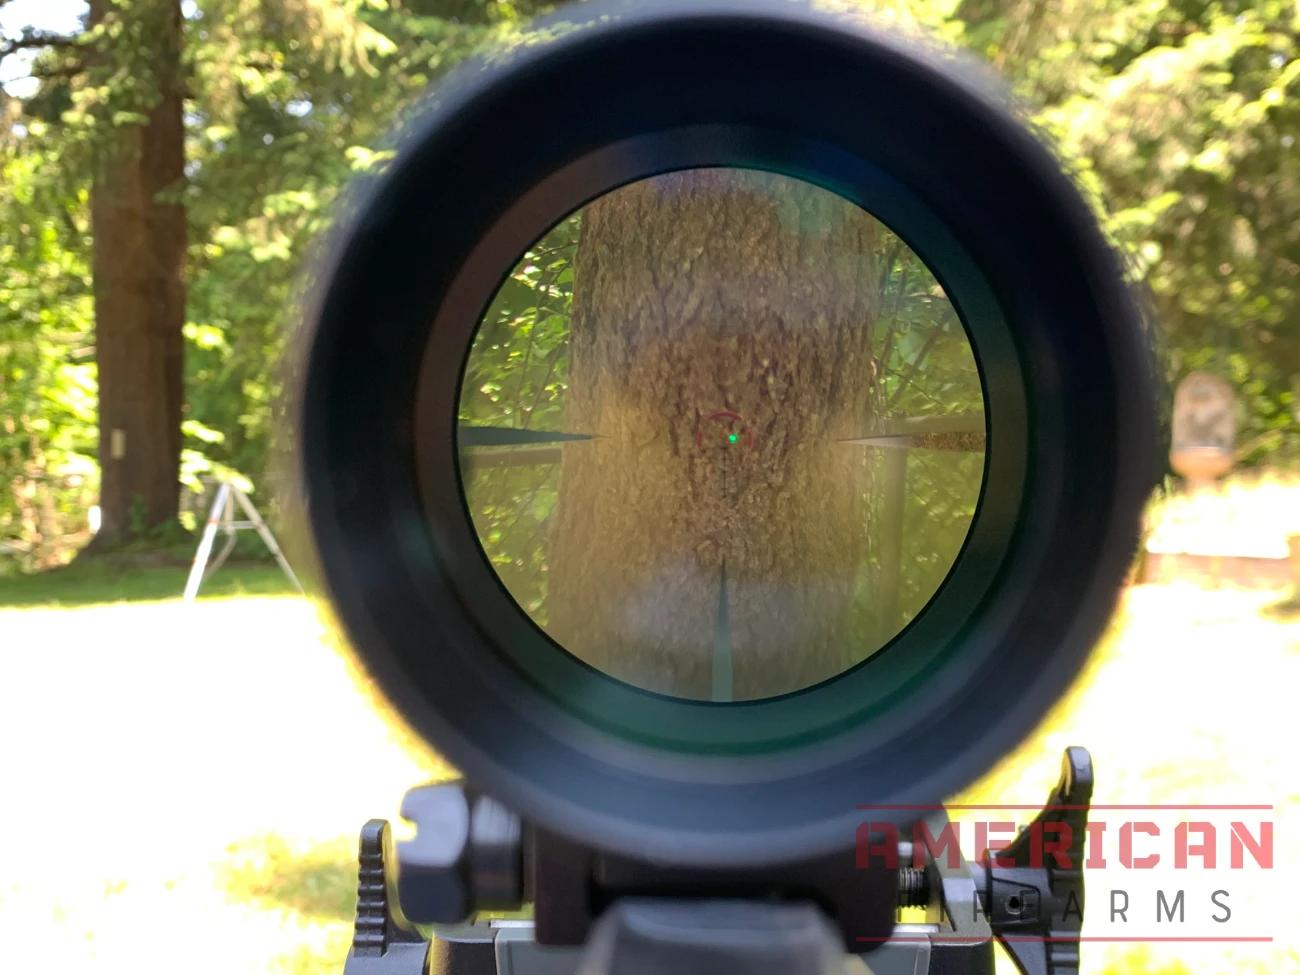 The laser was nice and bright at 50 yards in broad daylight.